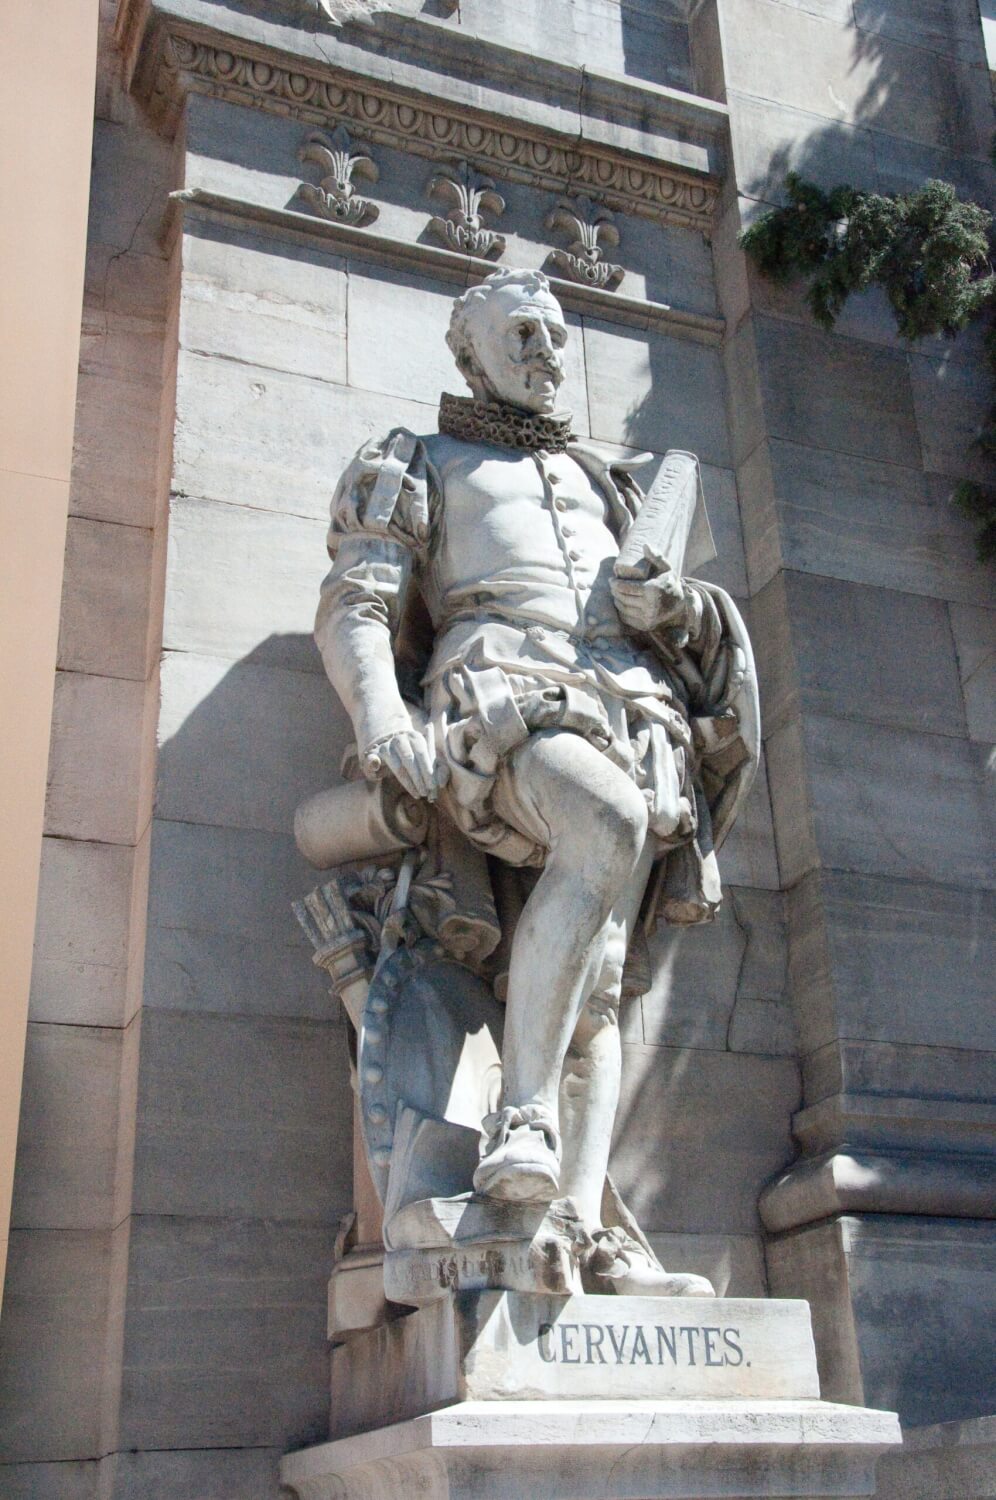 A marble statue of Cervantes.